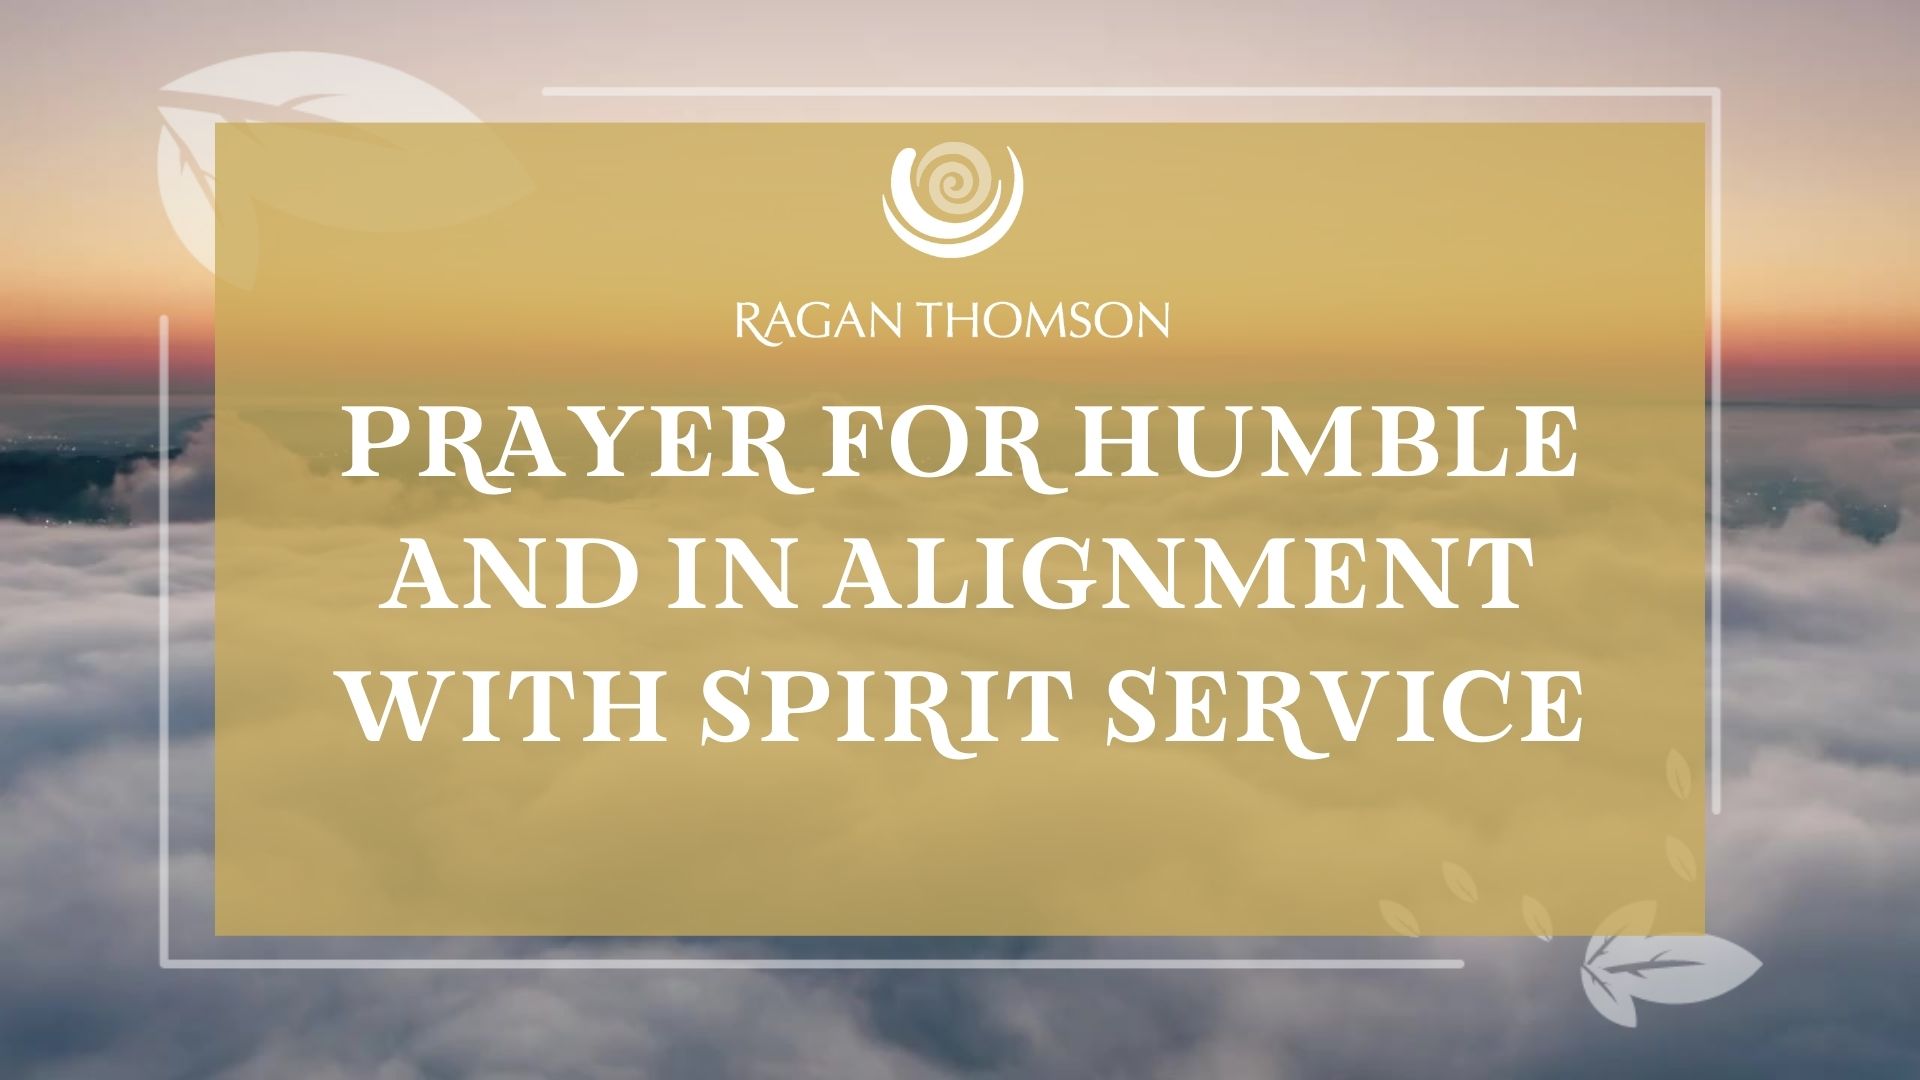 Ragan Thomson - Pryaer for humble and in alignment with spirit service